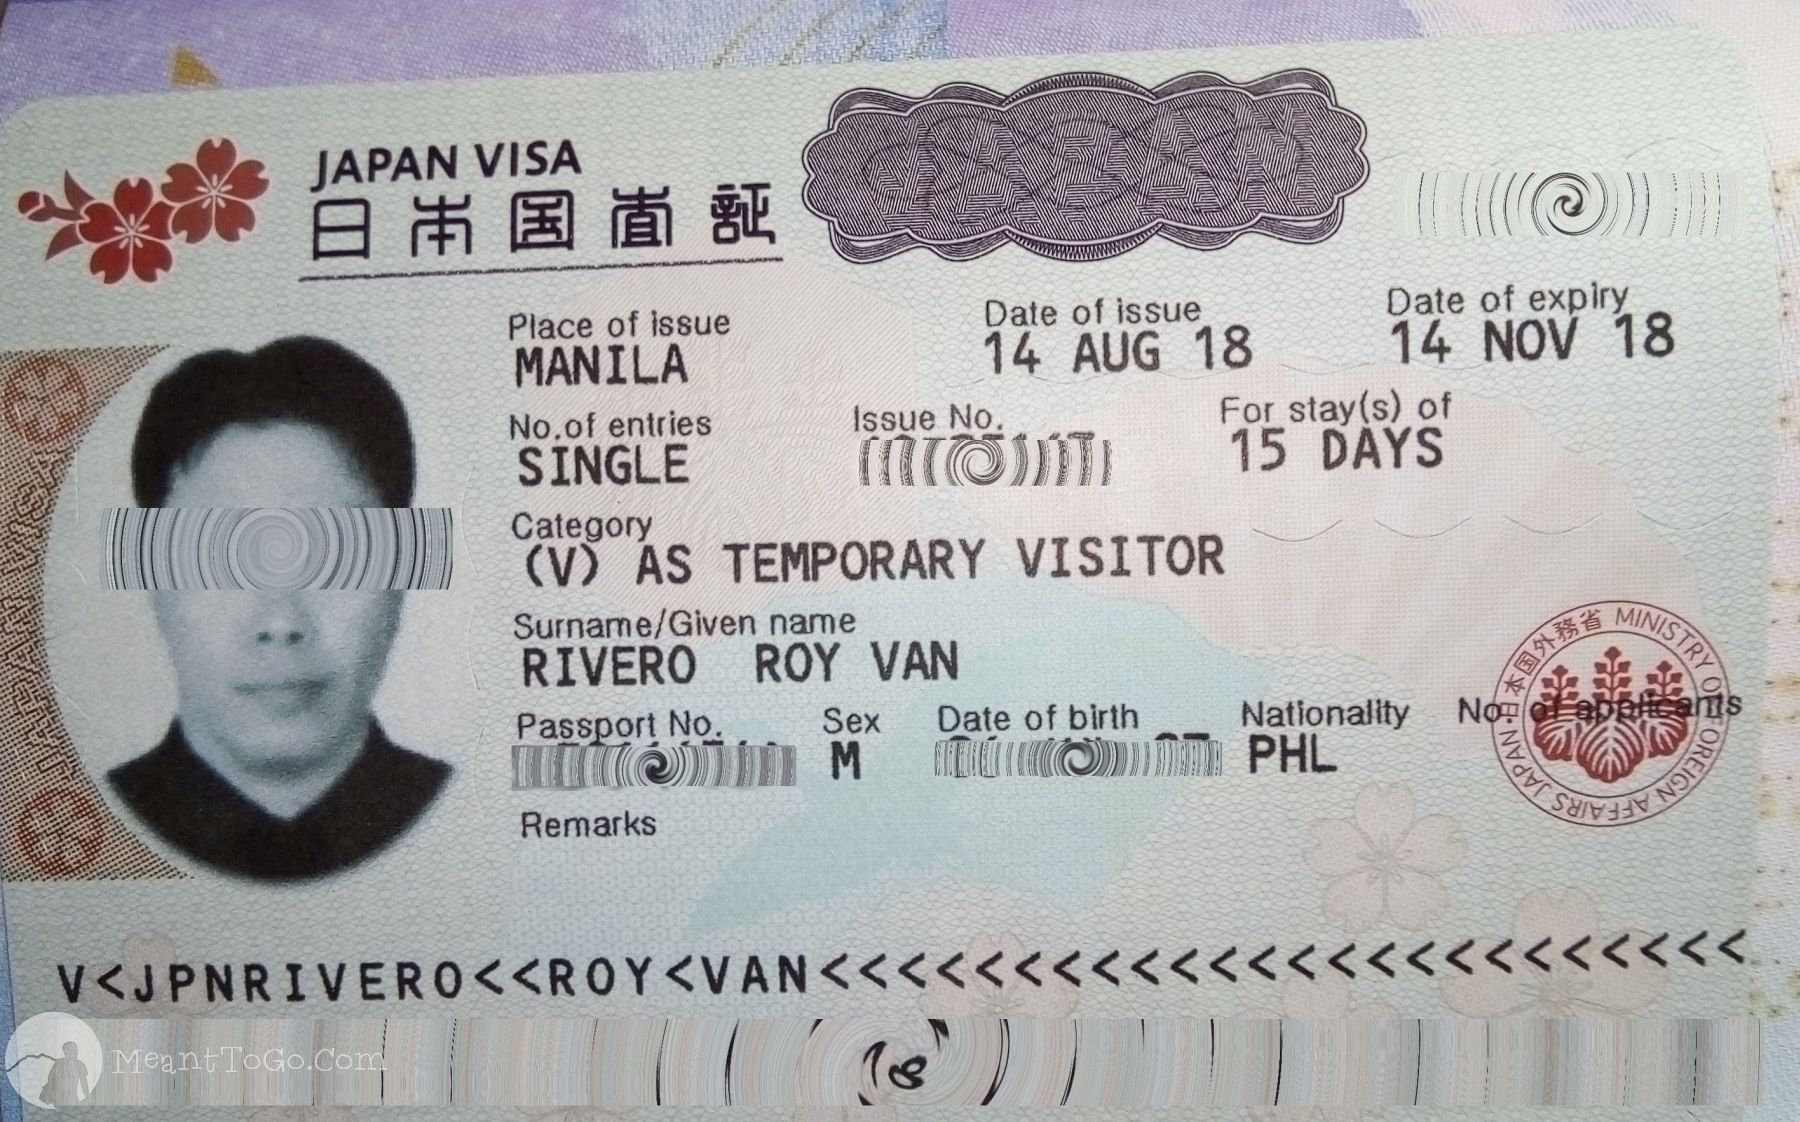 How I managed to secure a Japan tourist visa despite the lacking requirements